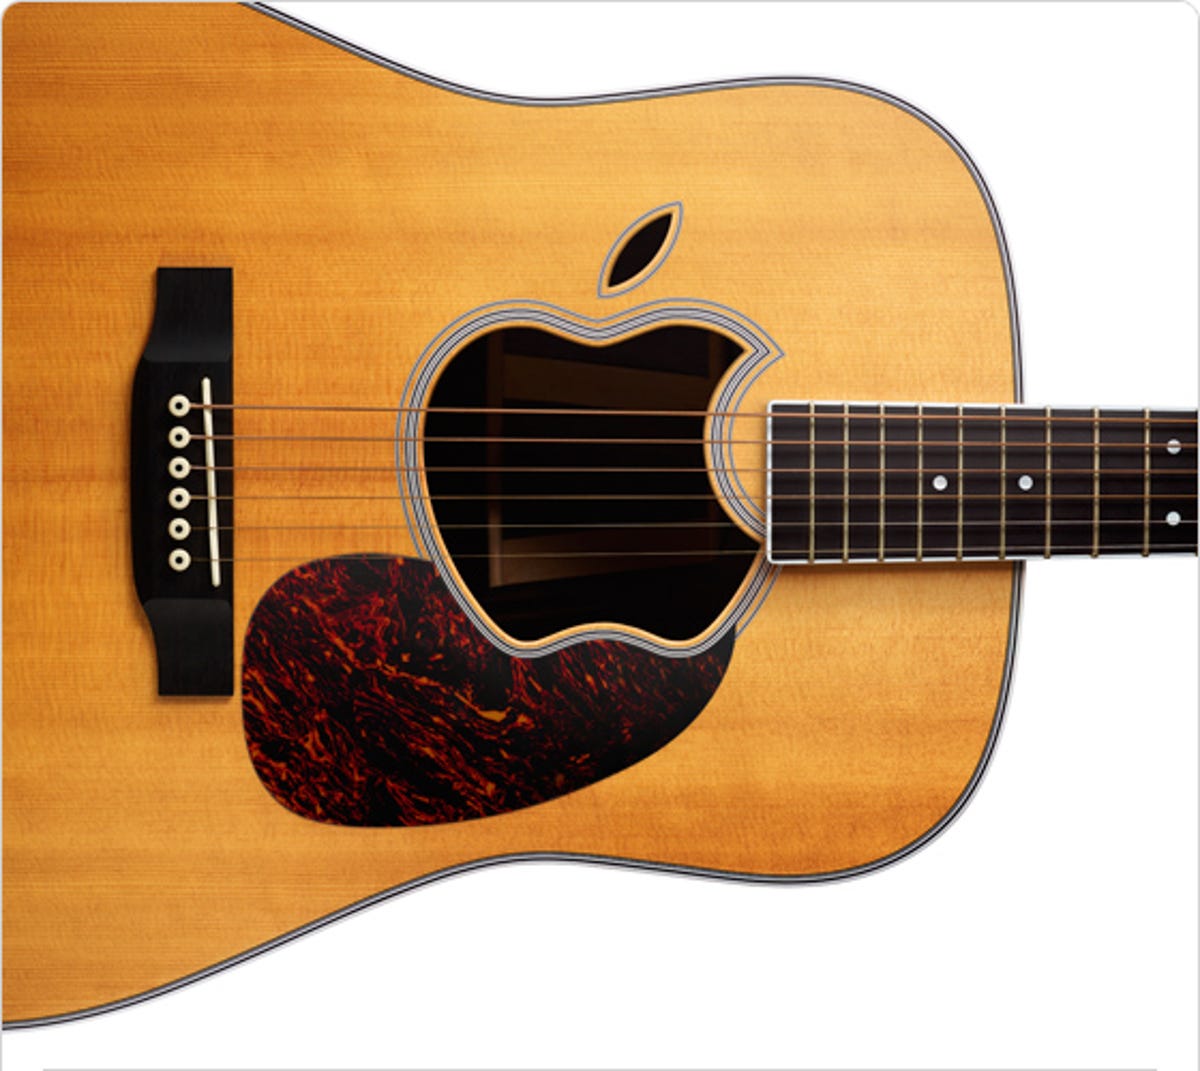 What does an acoustic guitar have to do with digital-music players? We'll find out Wednesday at 10 a.m. PDT.